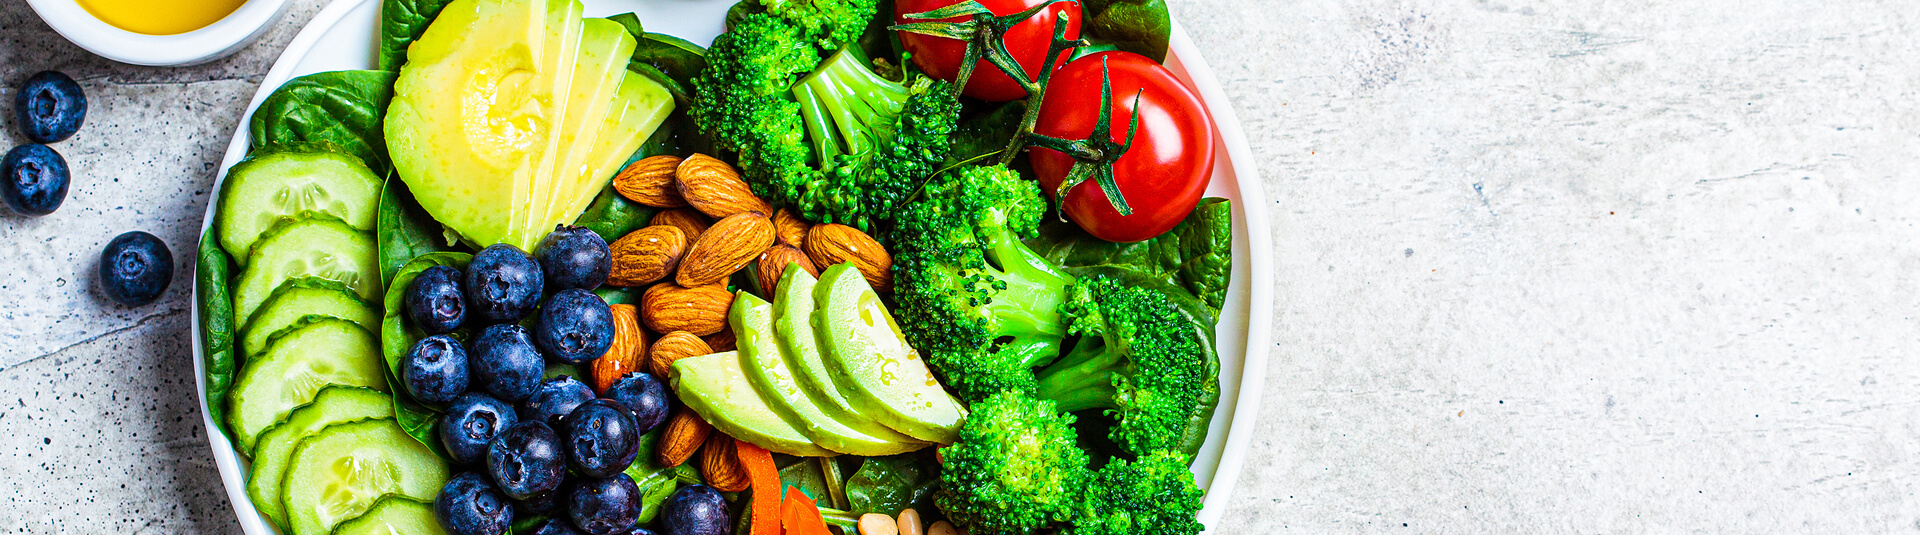 7 Ways to Fix Your Diet To Tame Chronic Inflammation and Autoimmune Disease 